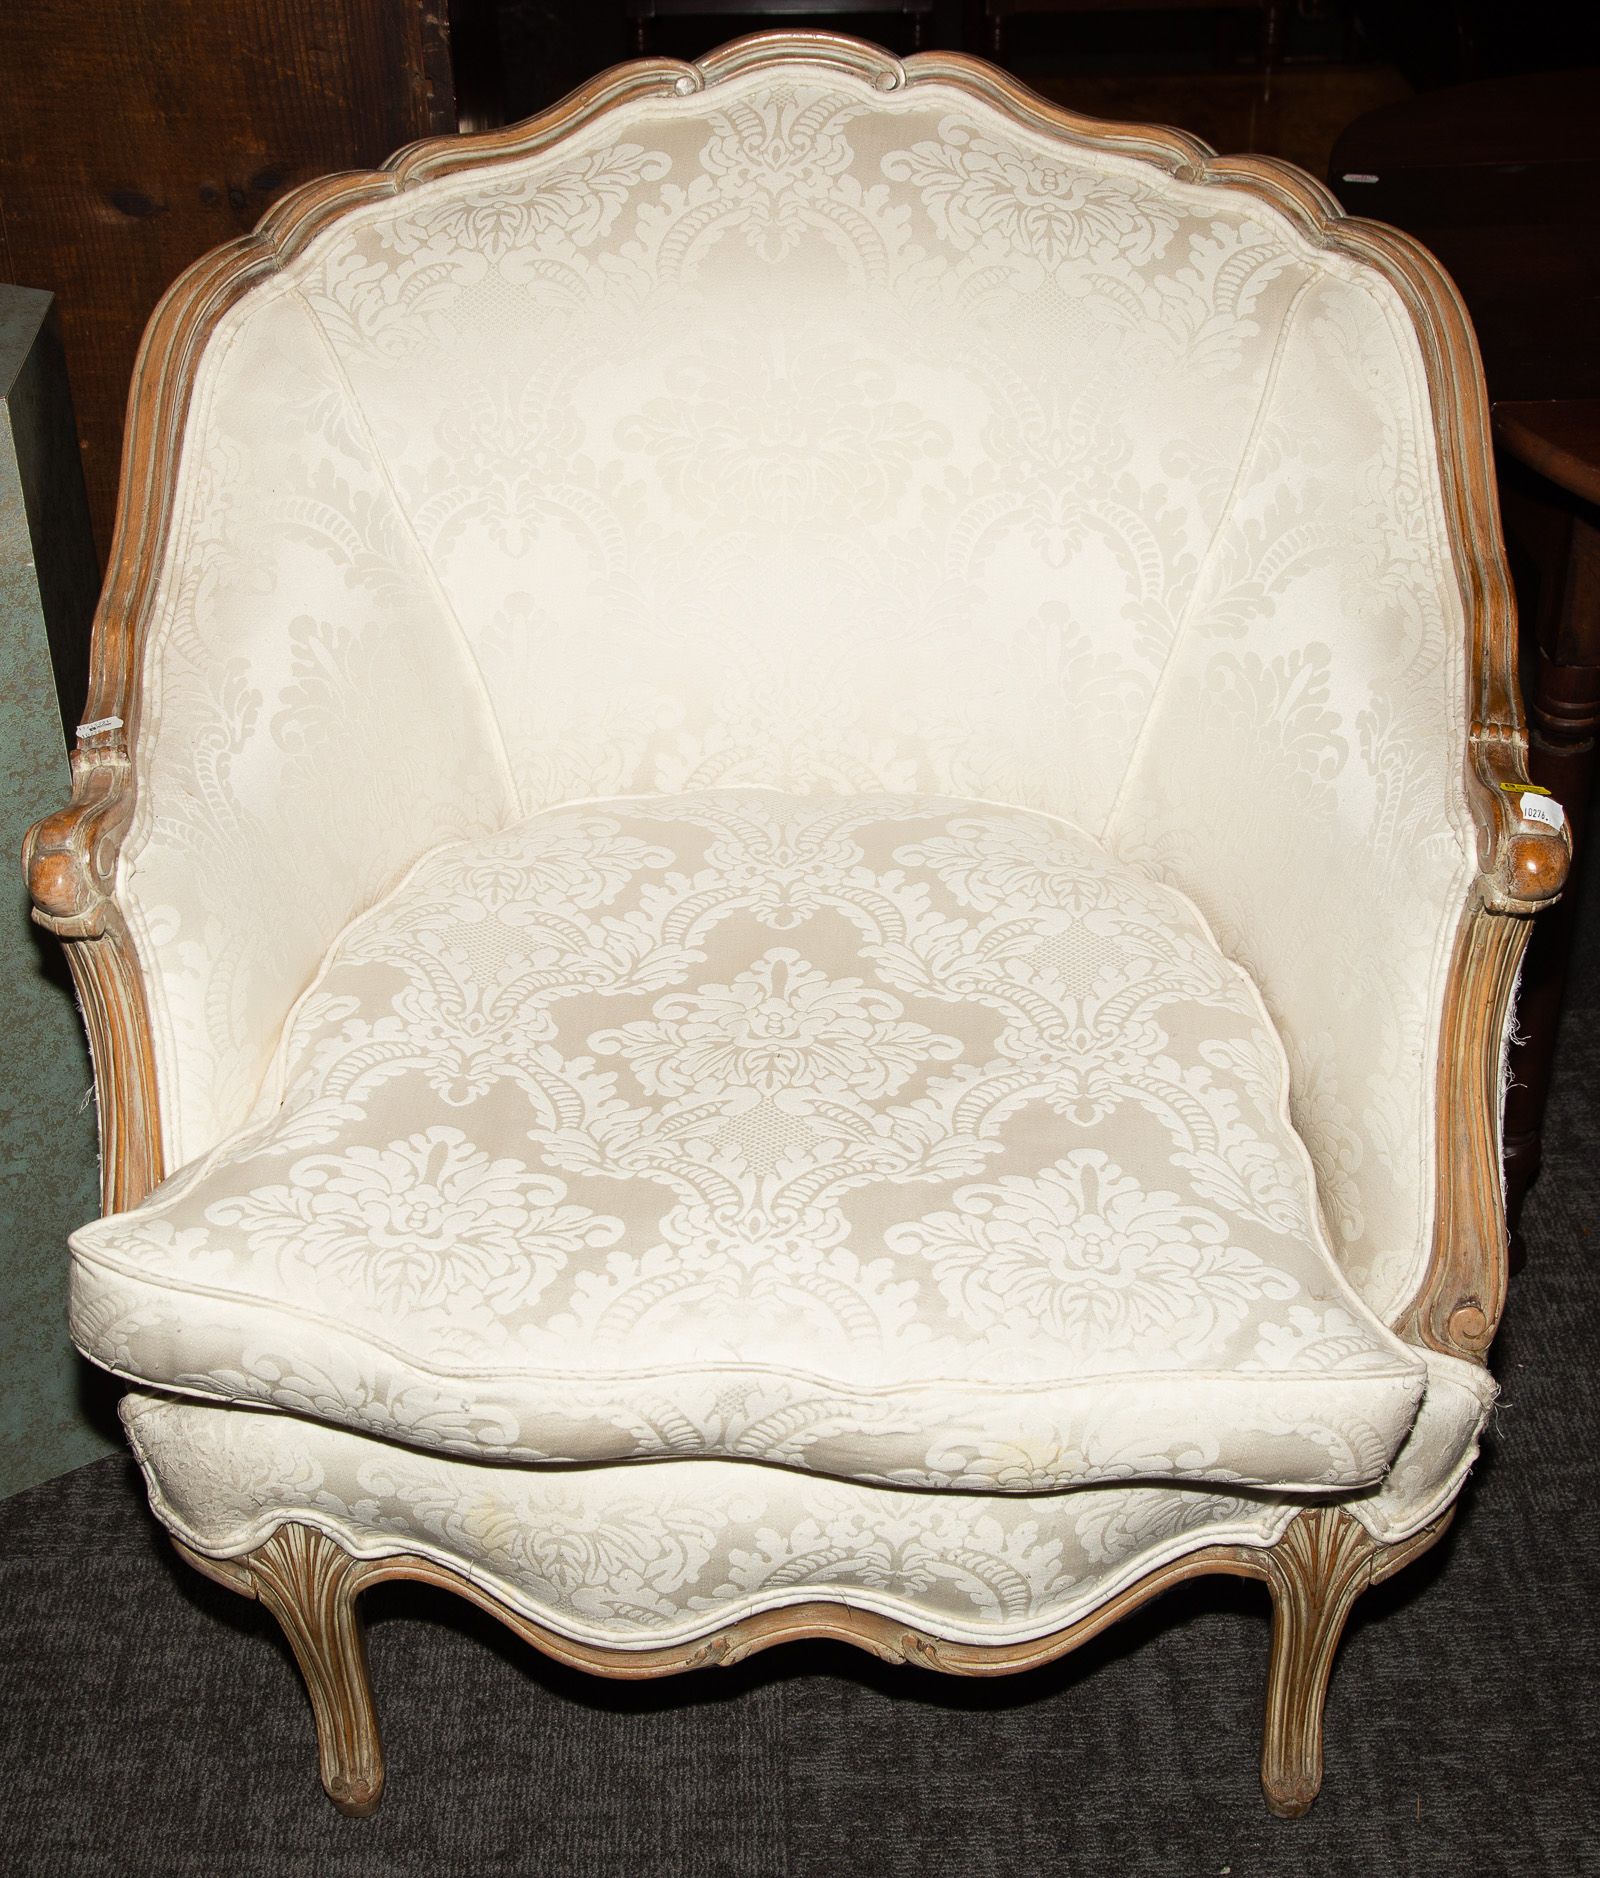 OVERSIZED LOUIS XV STYLE ARM CHAIR 289ccc